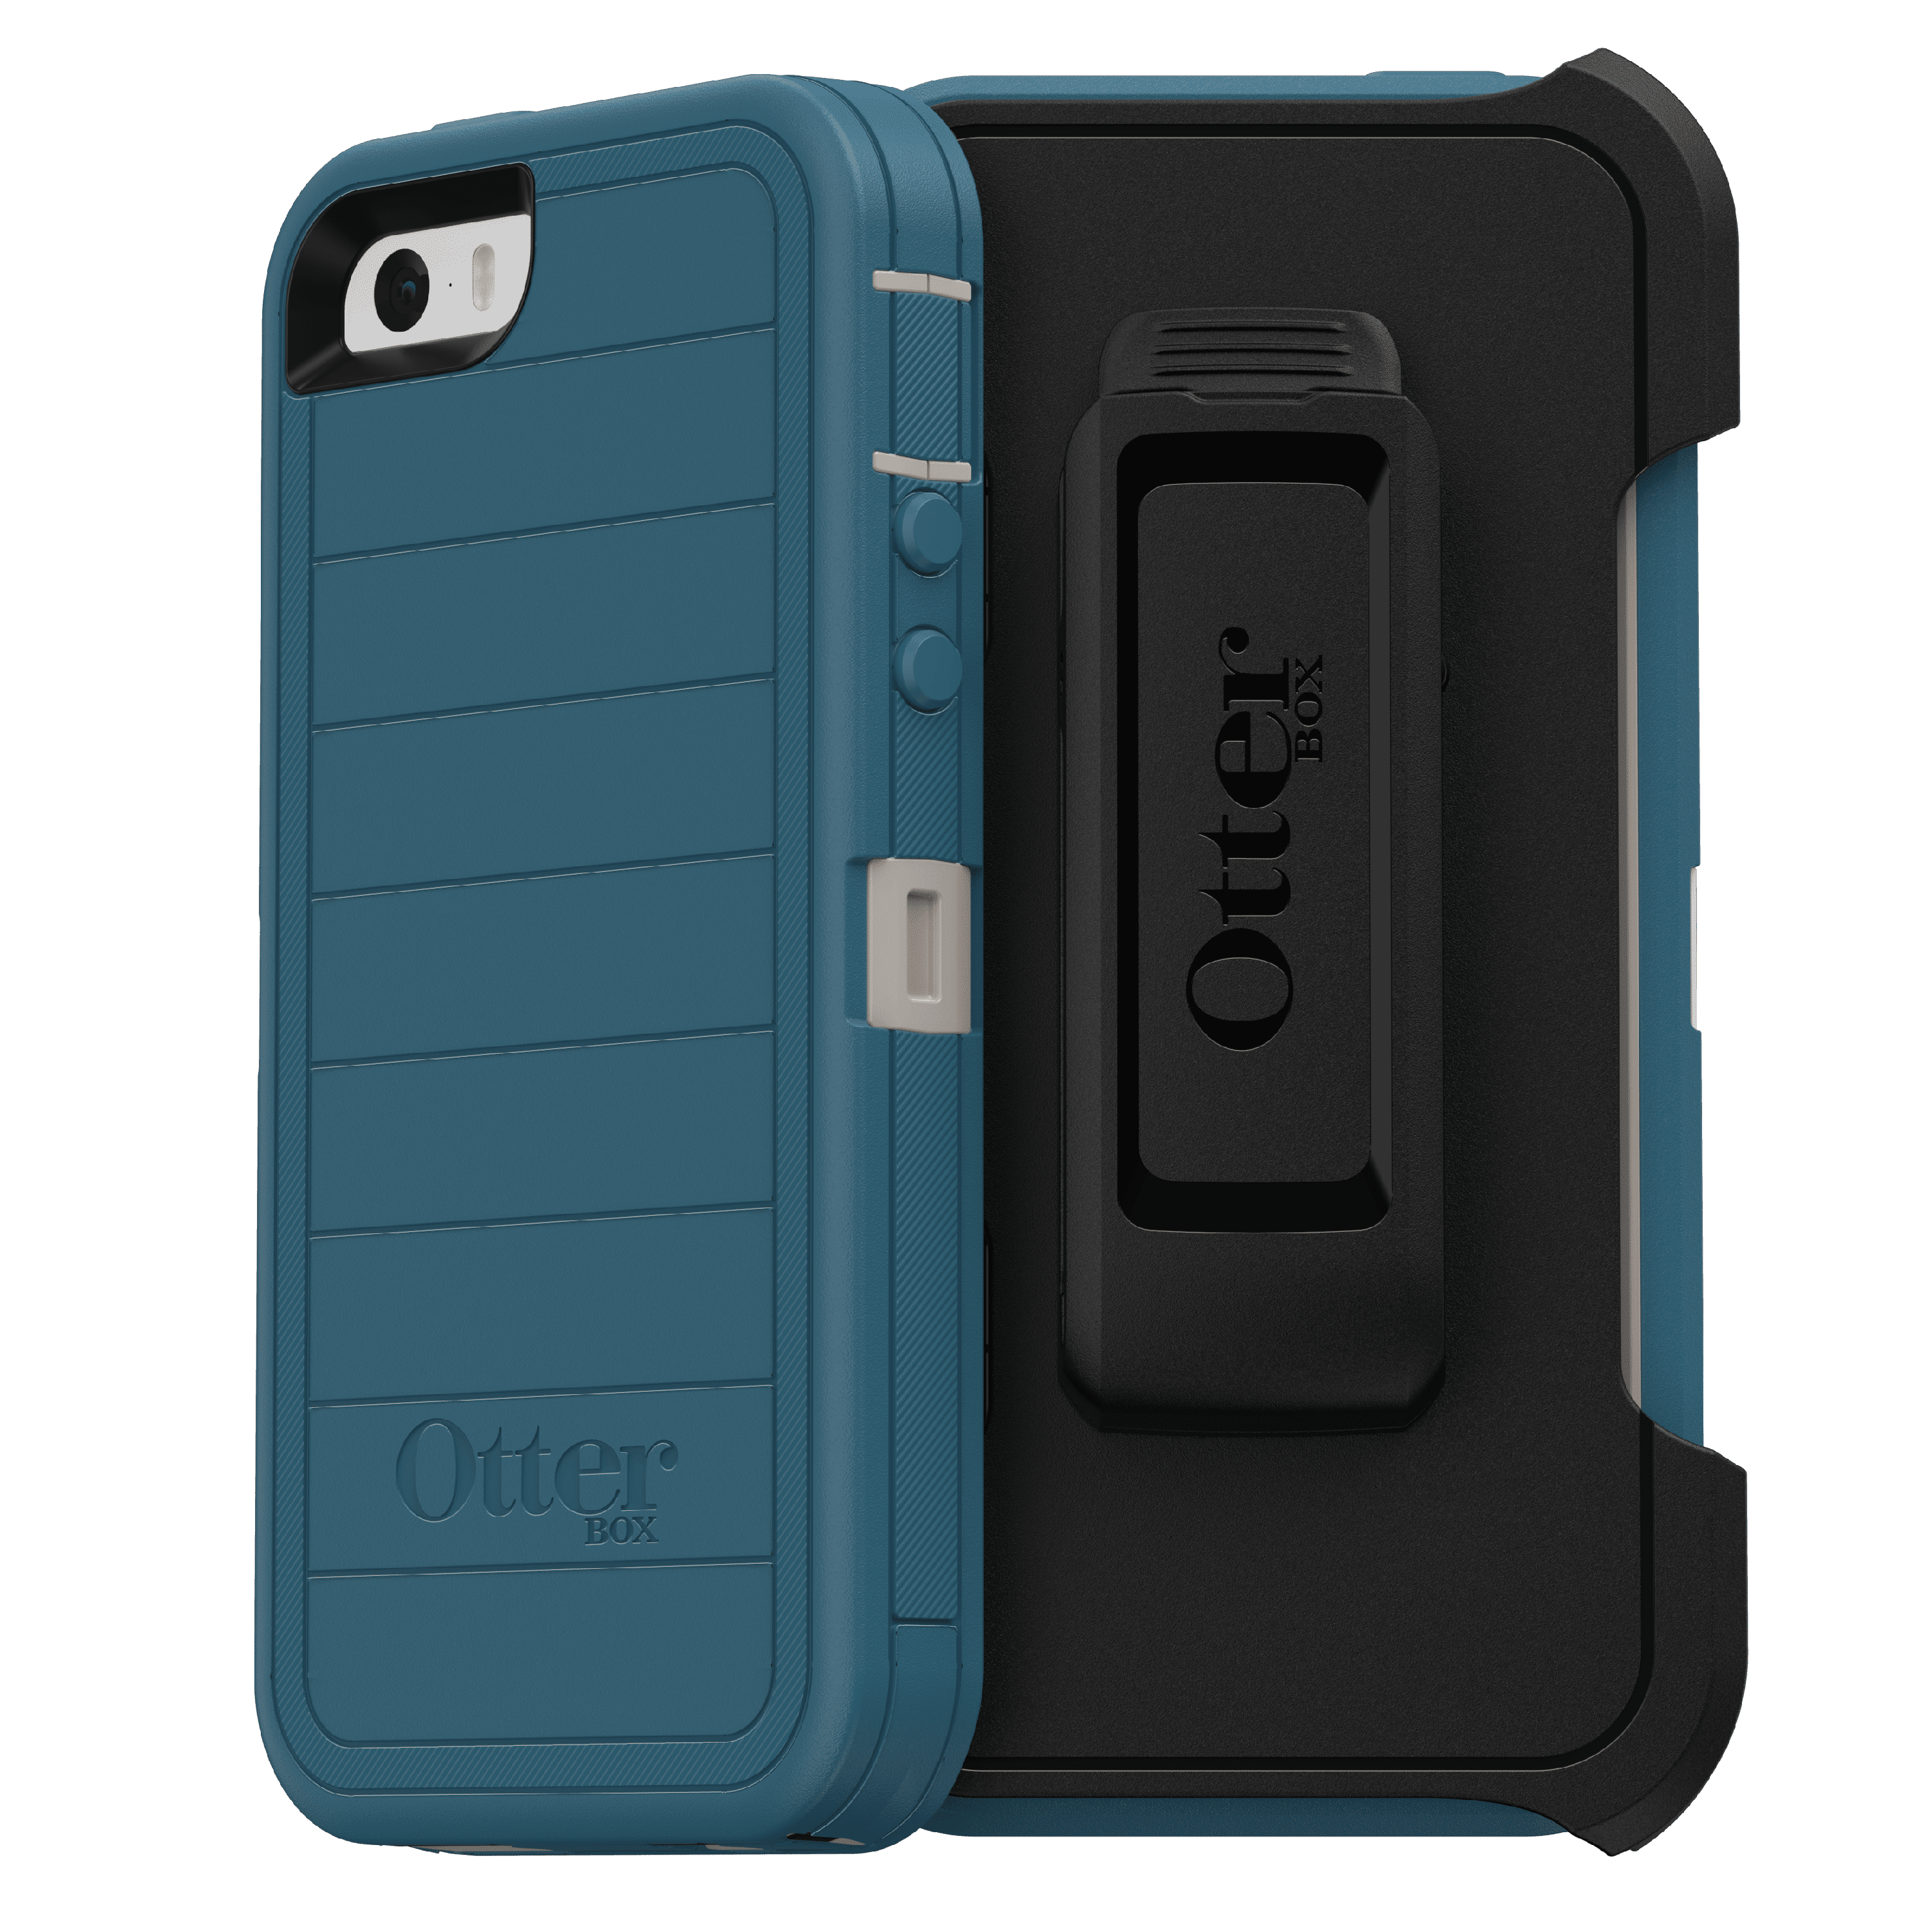 OtterBox Defender Series Pro Phone Case for Apple iPhone 5, iPhone 5S